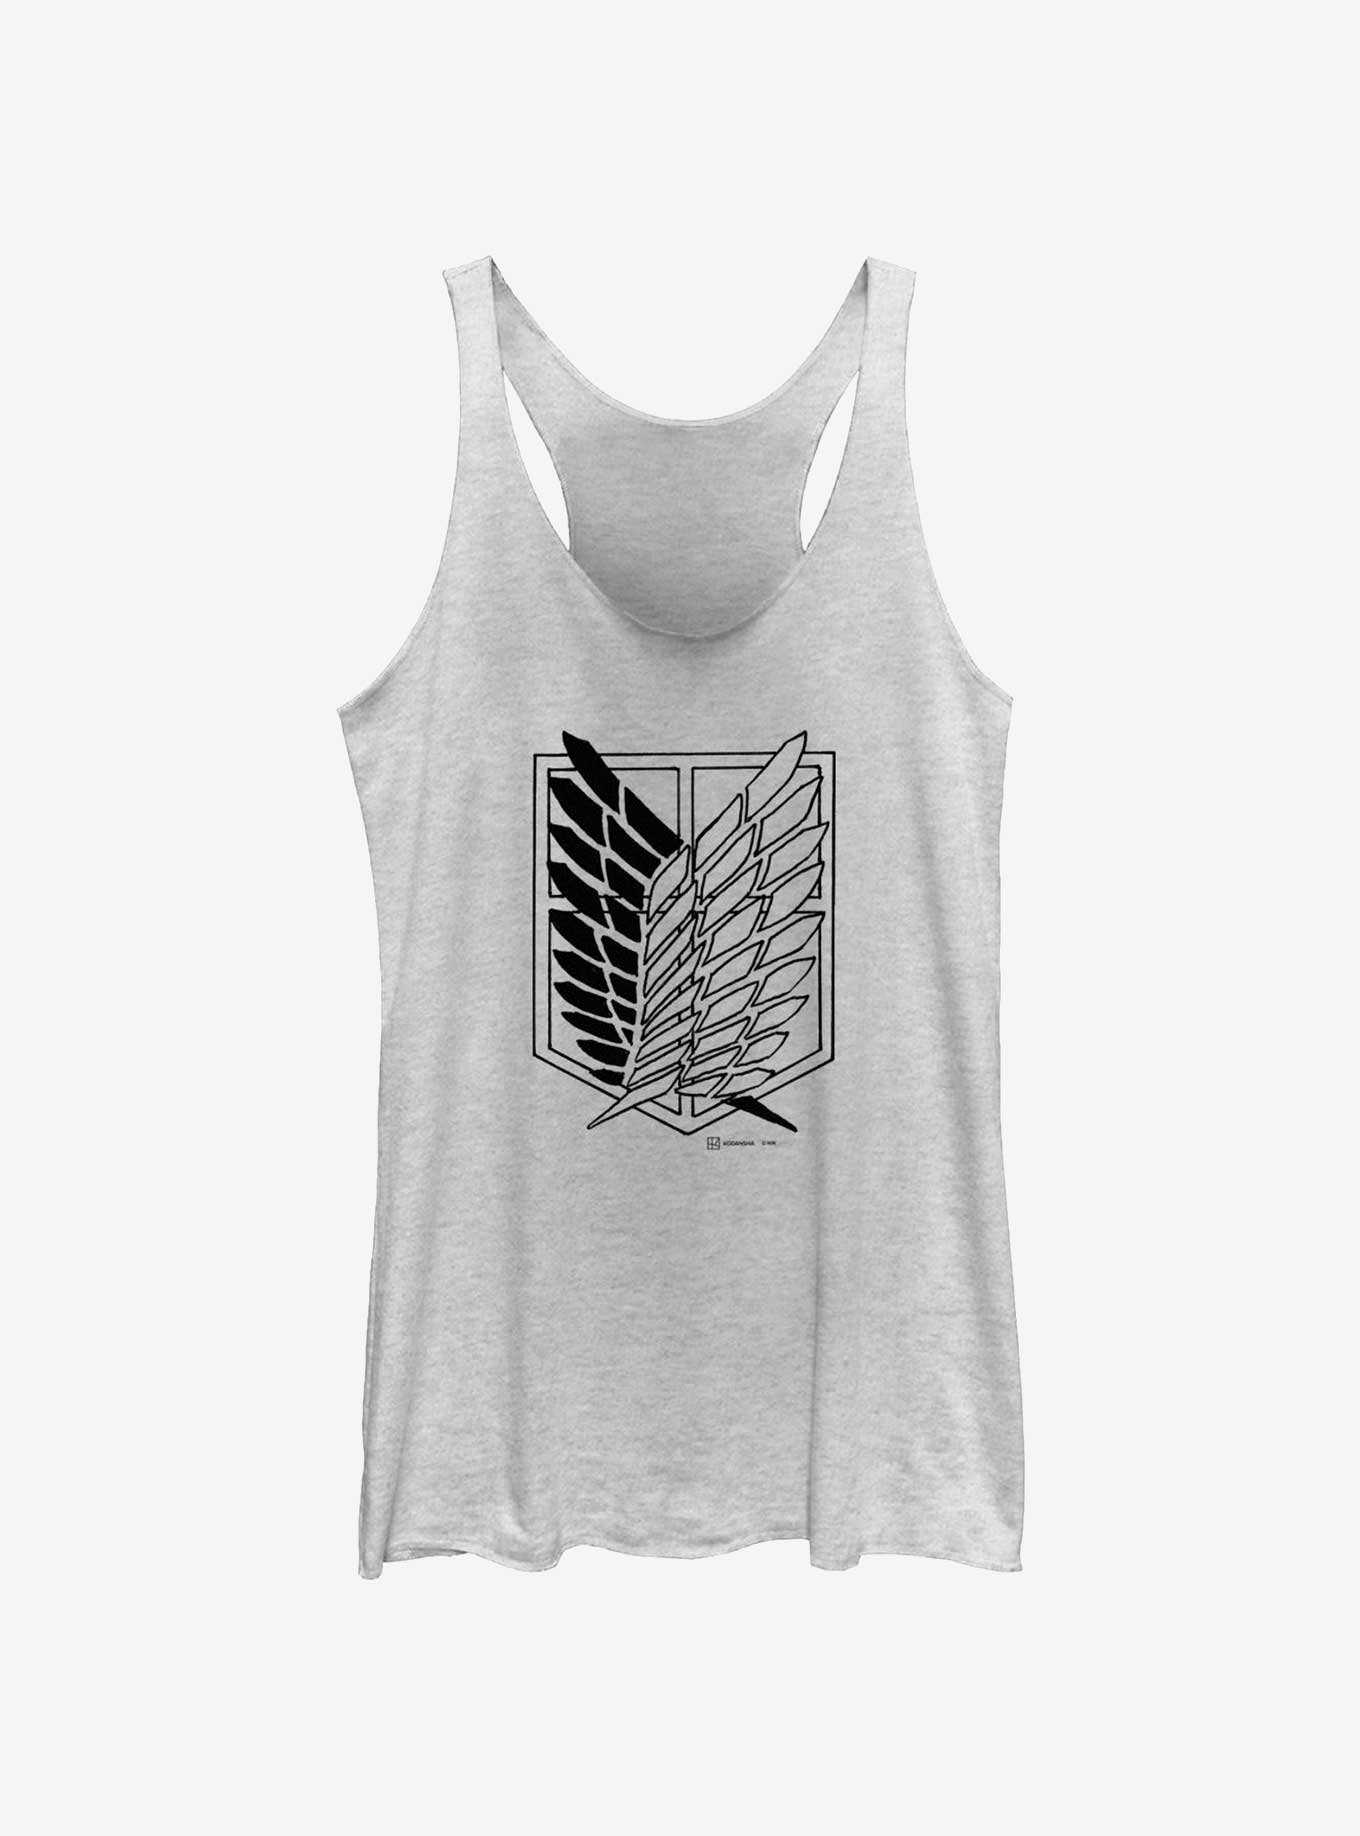 Attack on Titan Scout Regiment Wings of Freedom Girls Tank, , hi-res